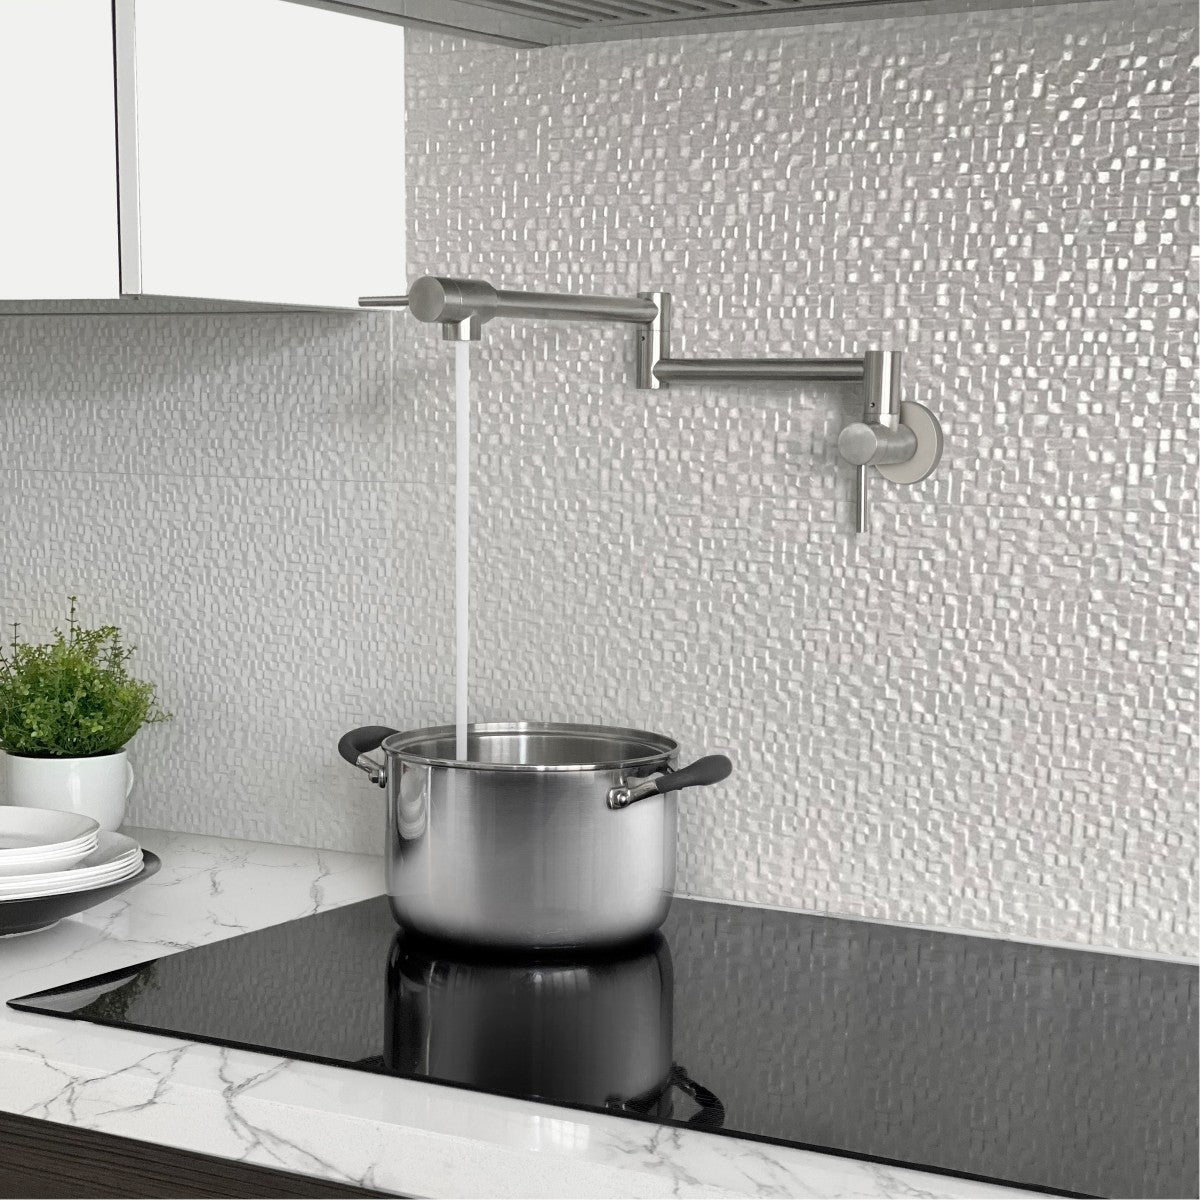 Stylish ASTI Stainless Steel Wall Mount Pot Filler Folding Stretchable with Single Hole Two Handles K-145S